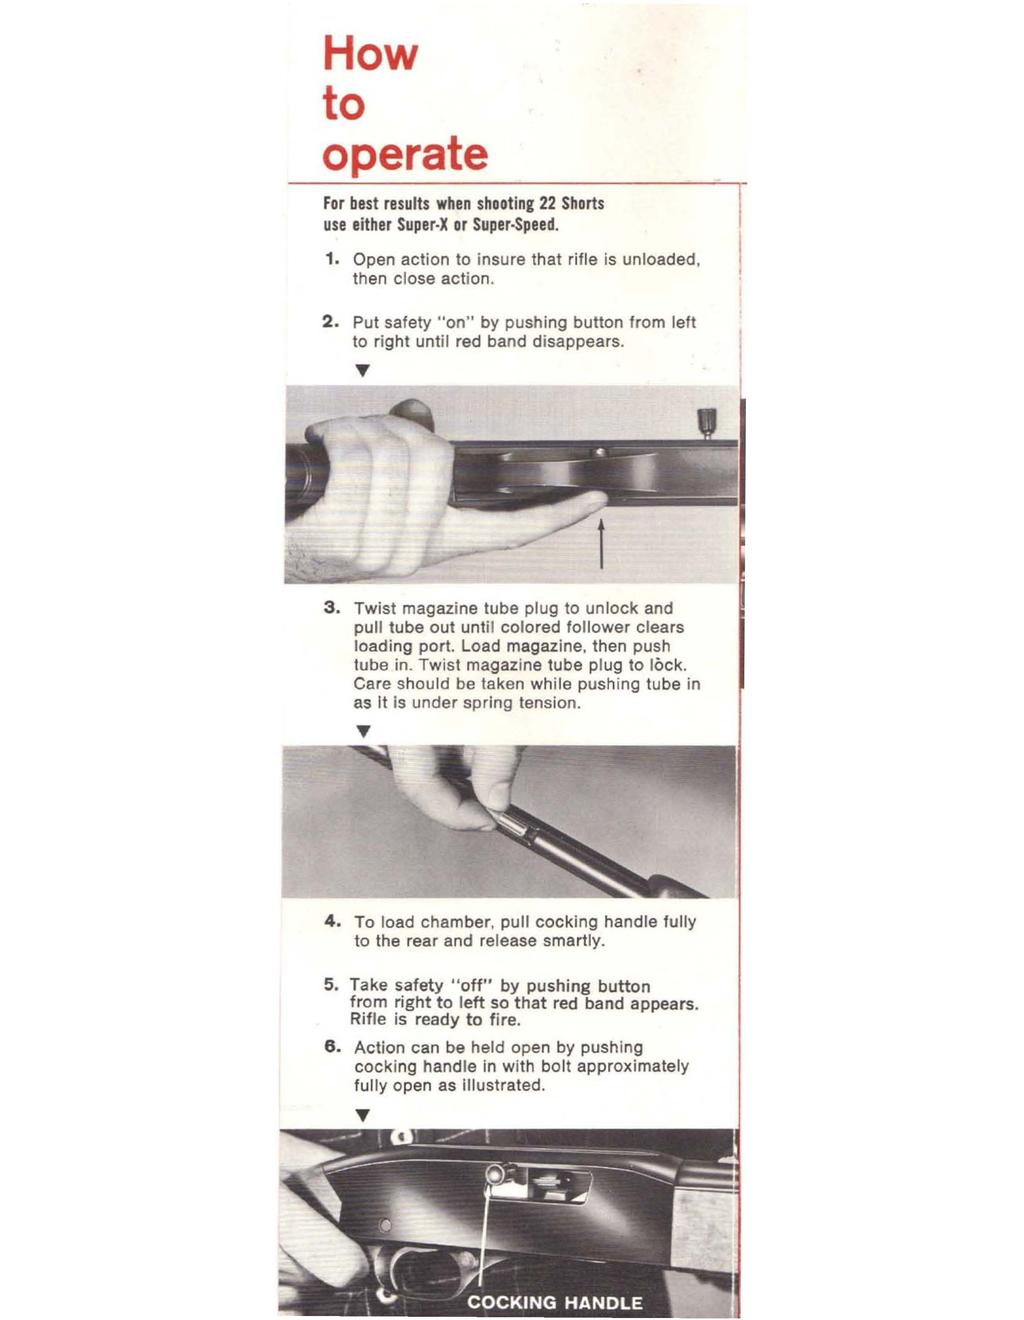 Ho operate For best results when shooting 22 Shorts use either Super X or Super Speed. 1. Open action insure that rifle is unloaded, then close action. 2. Put safety "on" by pushing butn from left right until red band disappears.